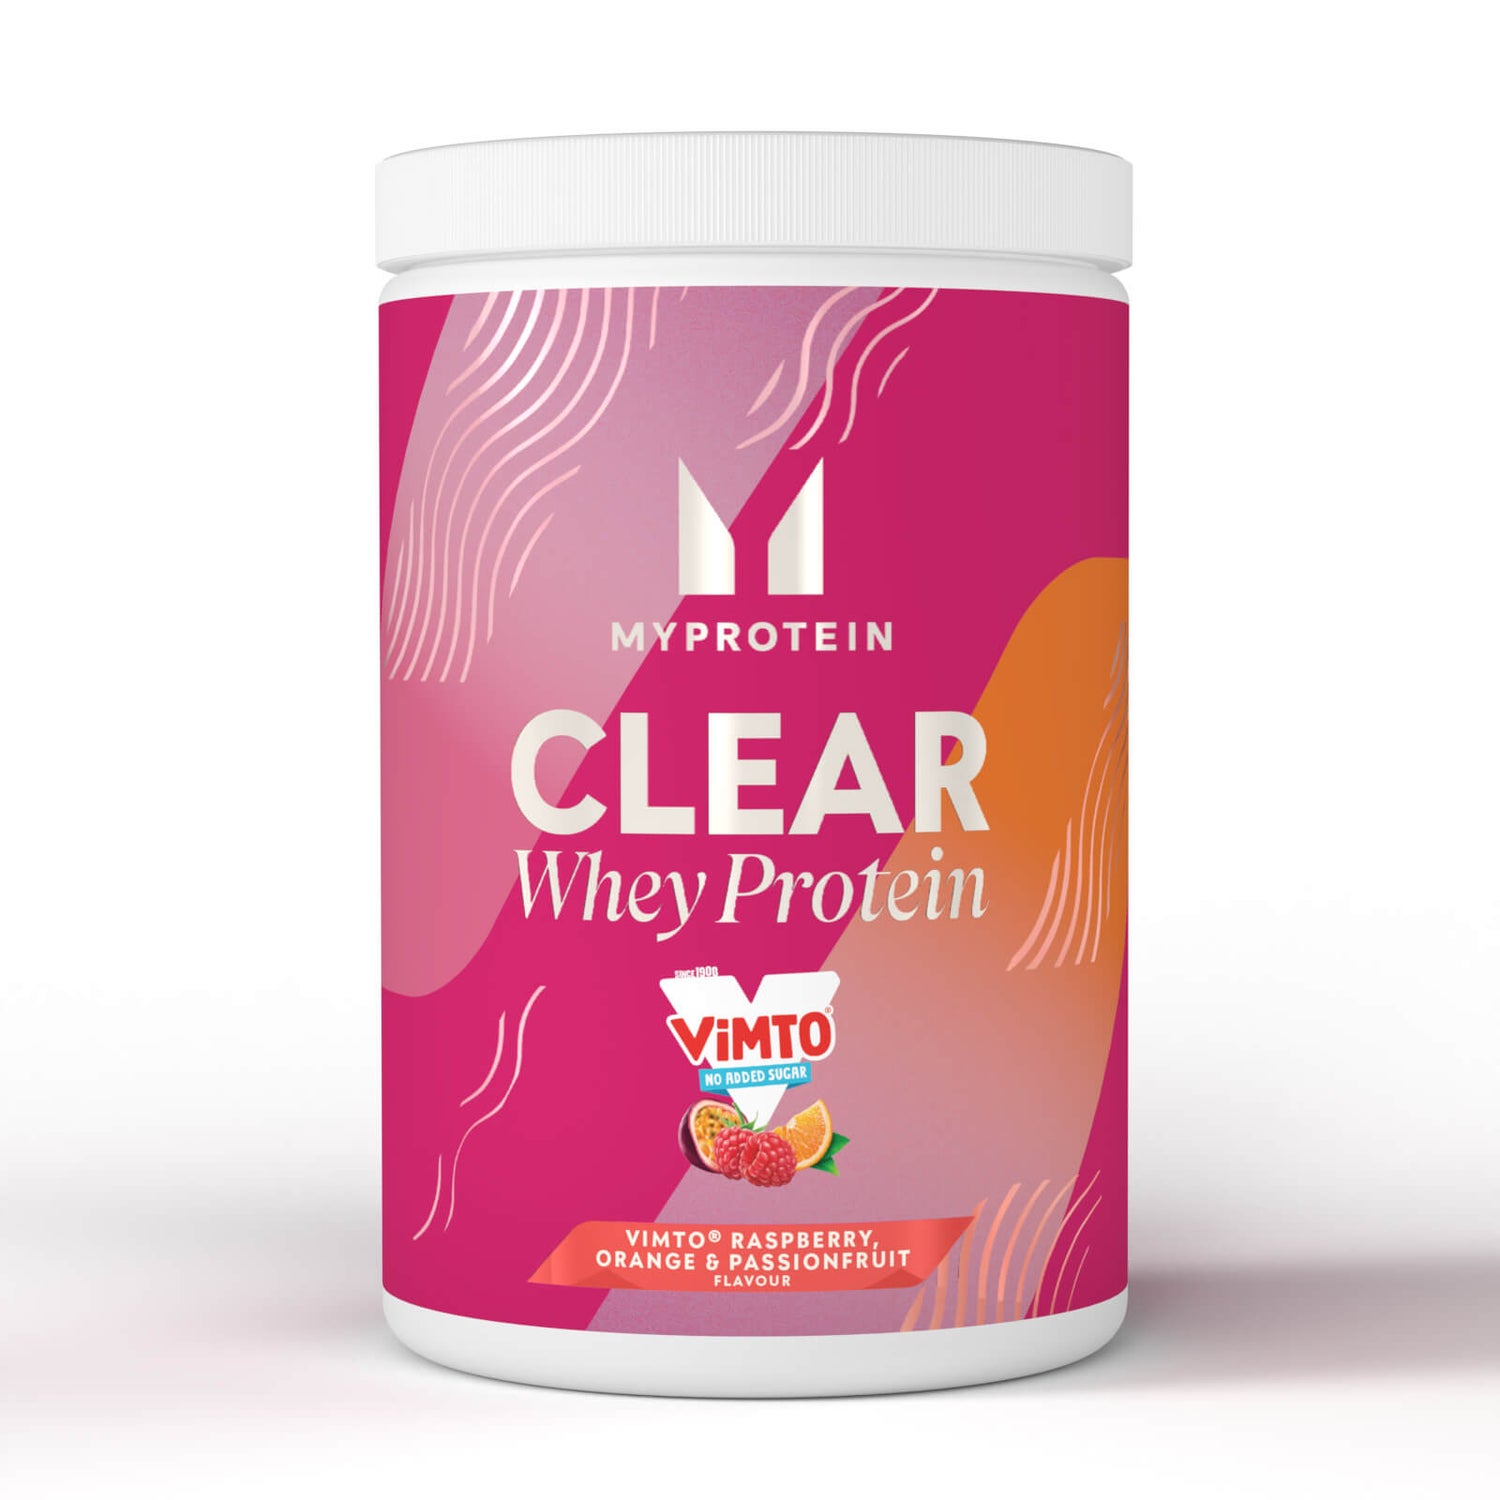 Clear Whey Protein Powder - 20servings - Vimto - Raspberry, Orange and Passionfruit